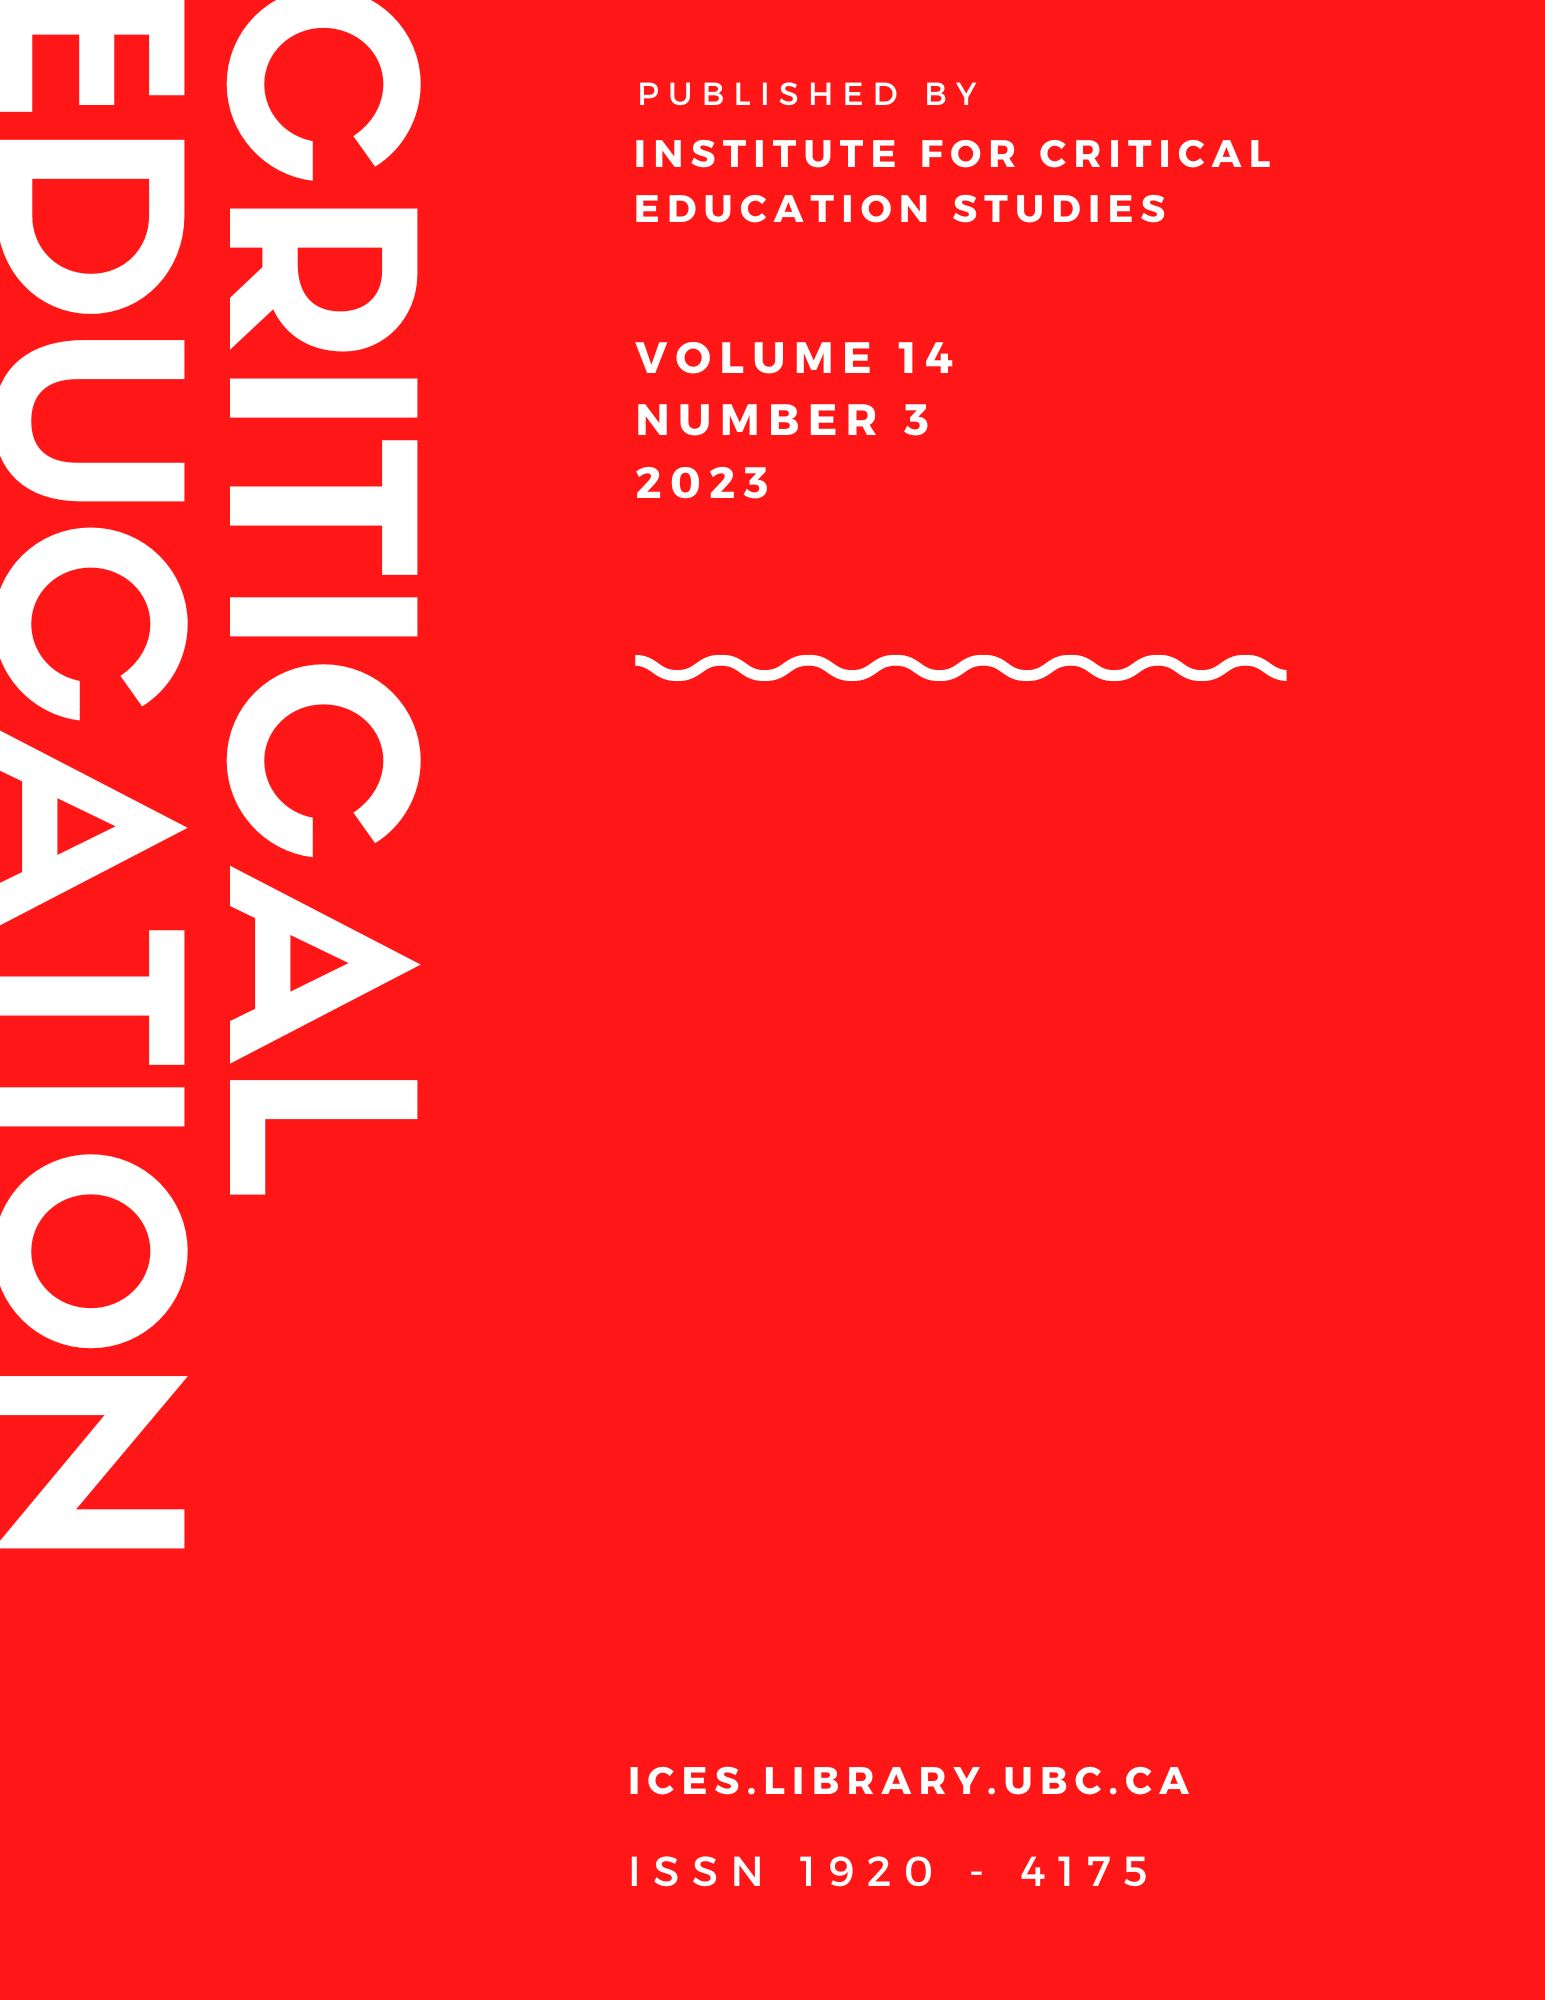 Critical Education Volume 14 Number 3 2023